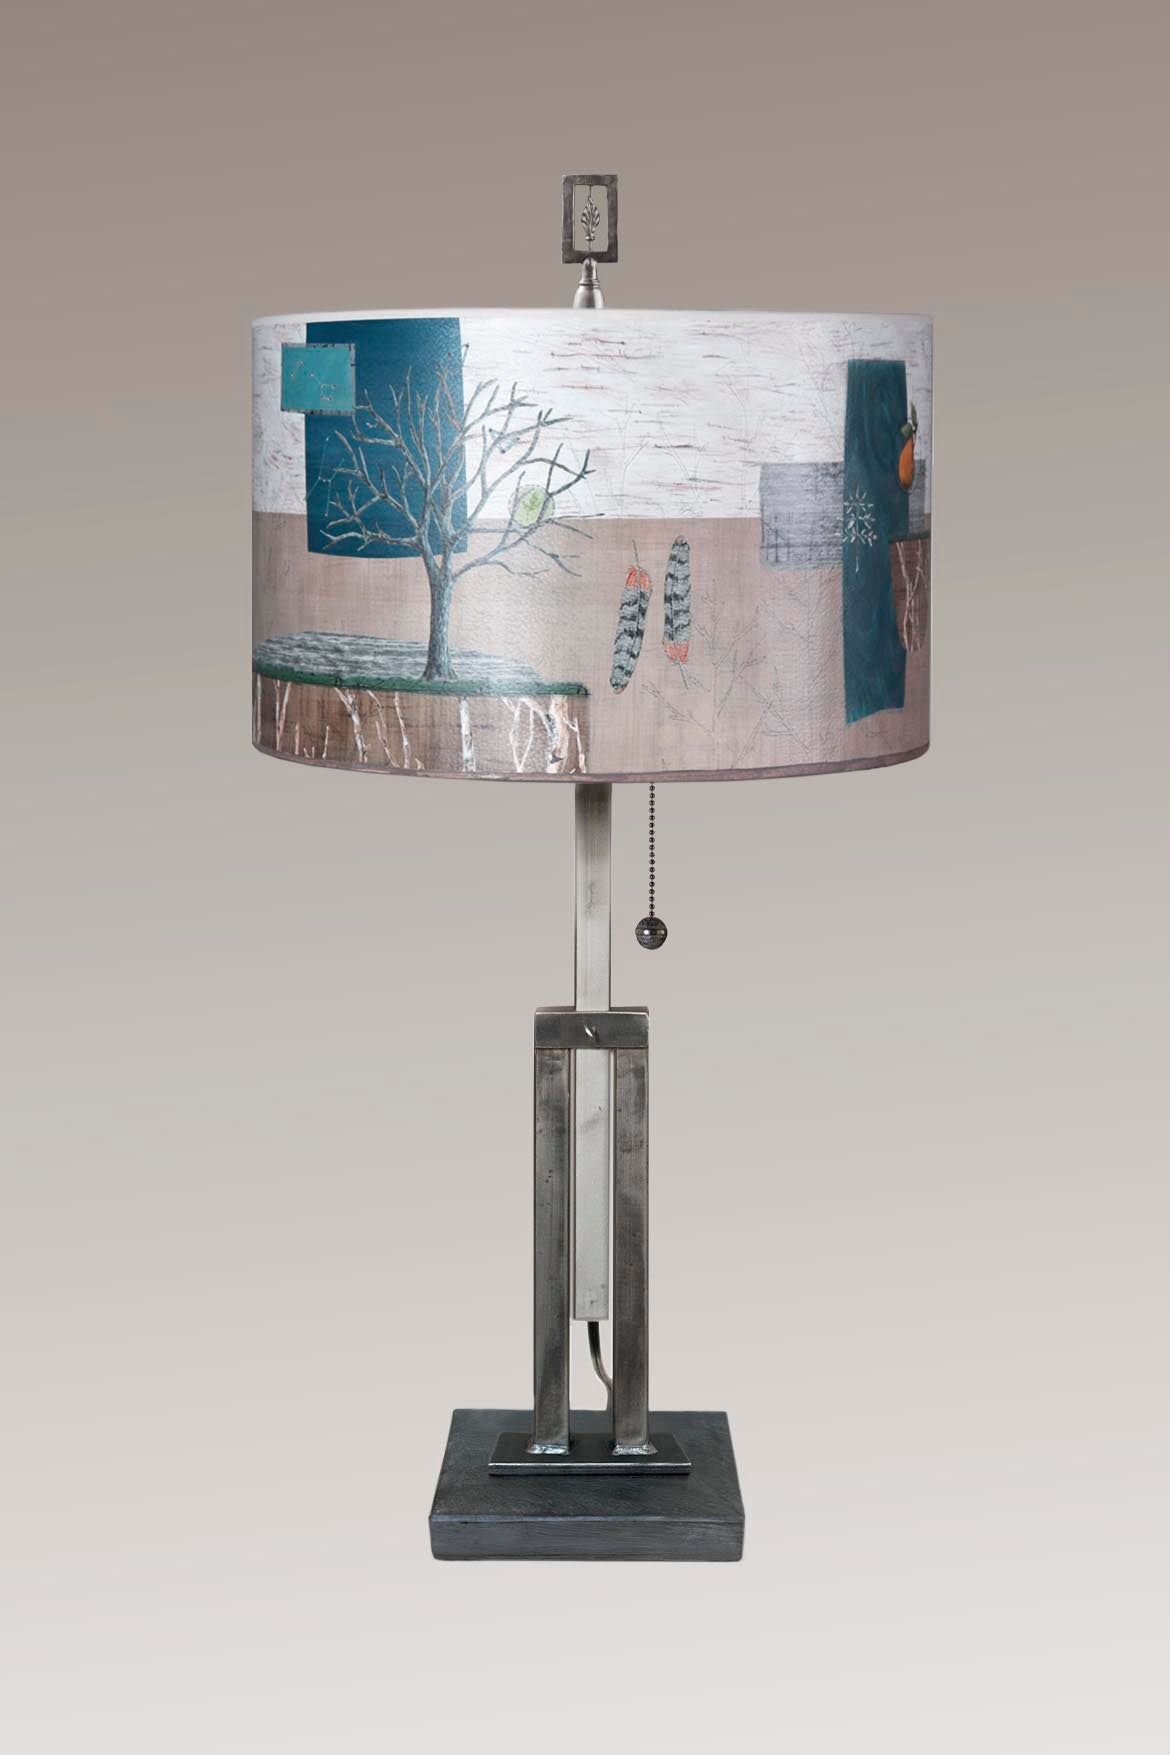 Janna Ugone &amp; Co Table Lamp Adjustable-Height Steel Table Lamp with Large Drum Shade in Wander in Drift